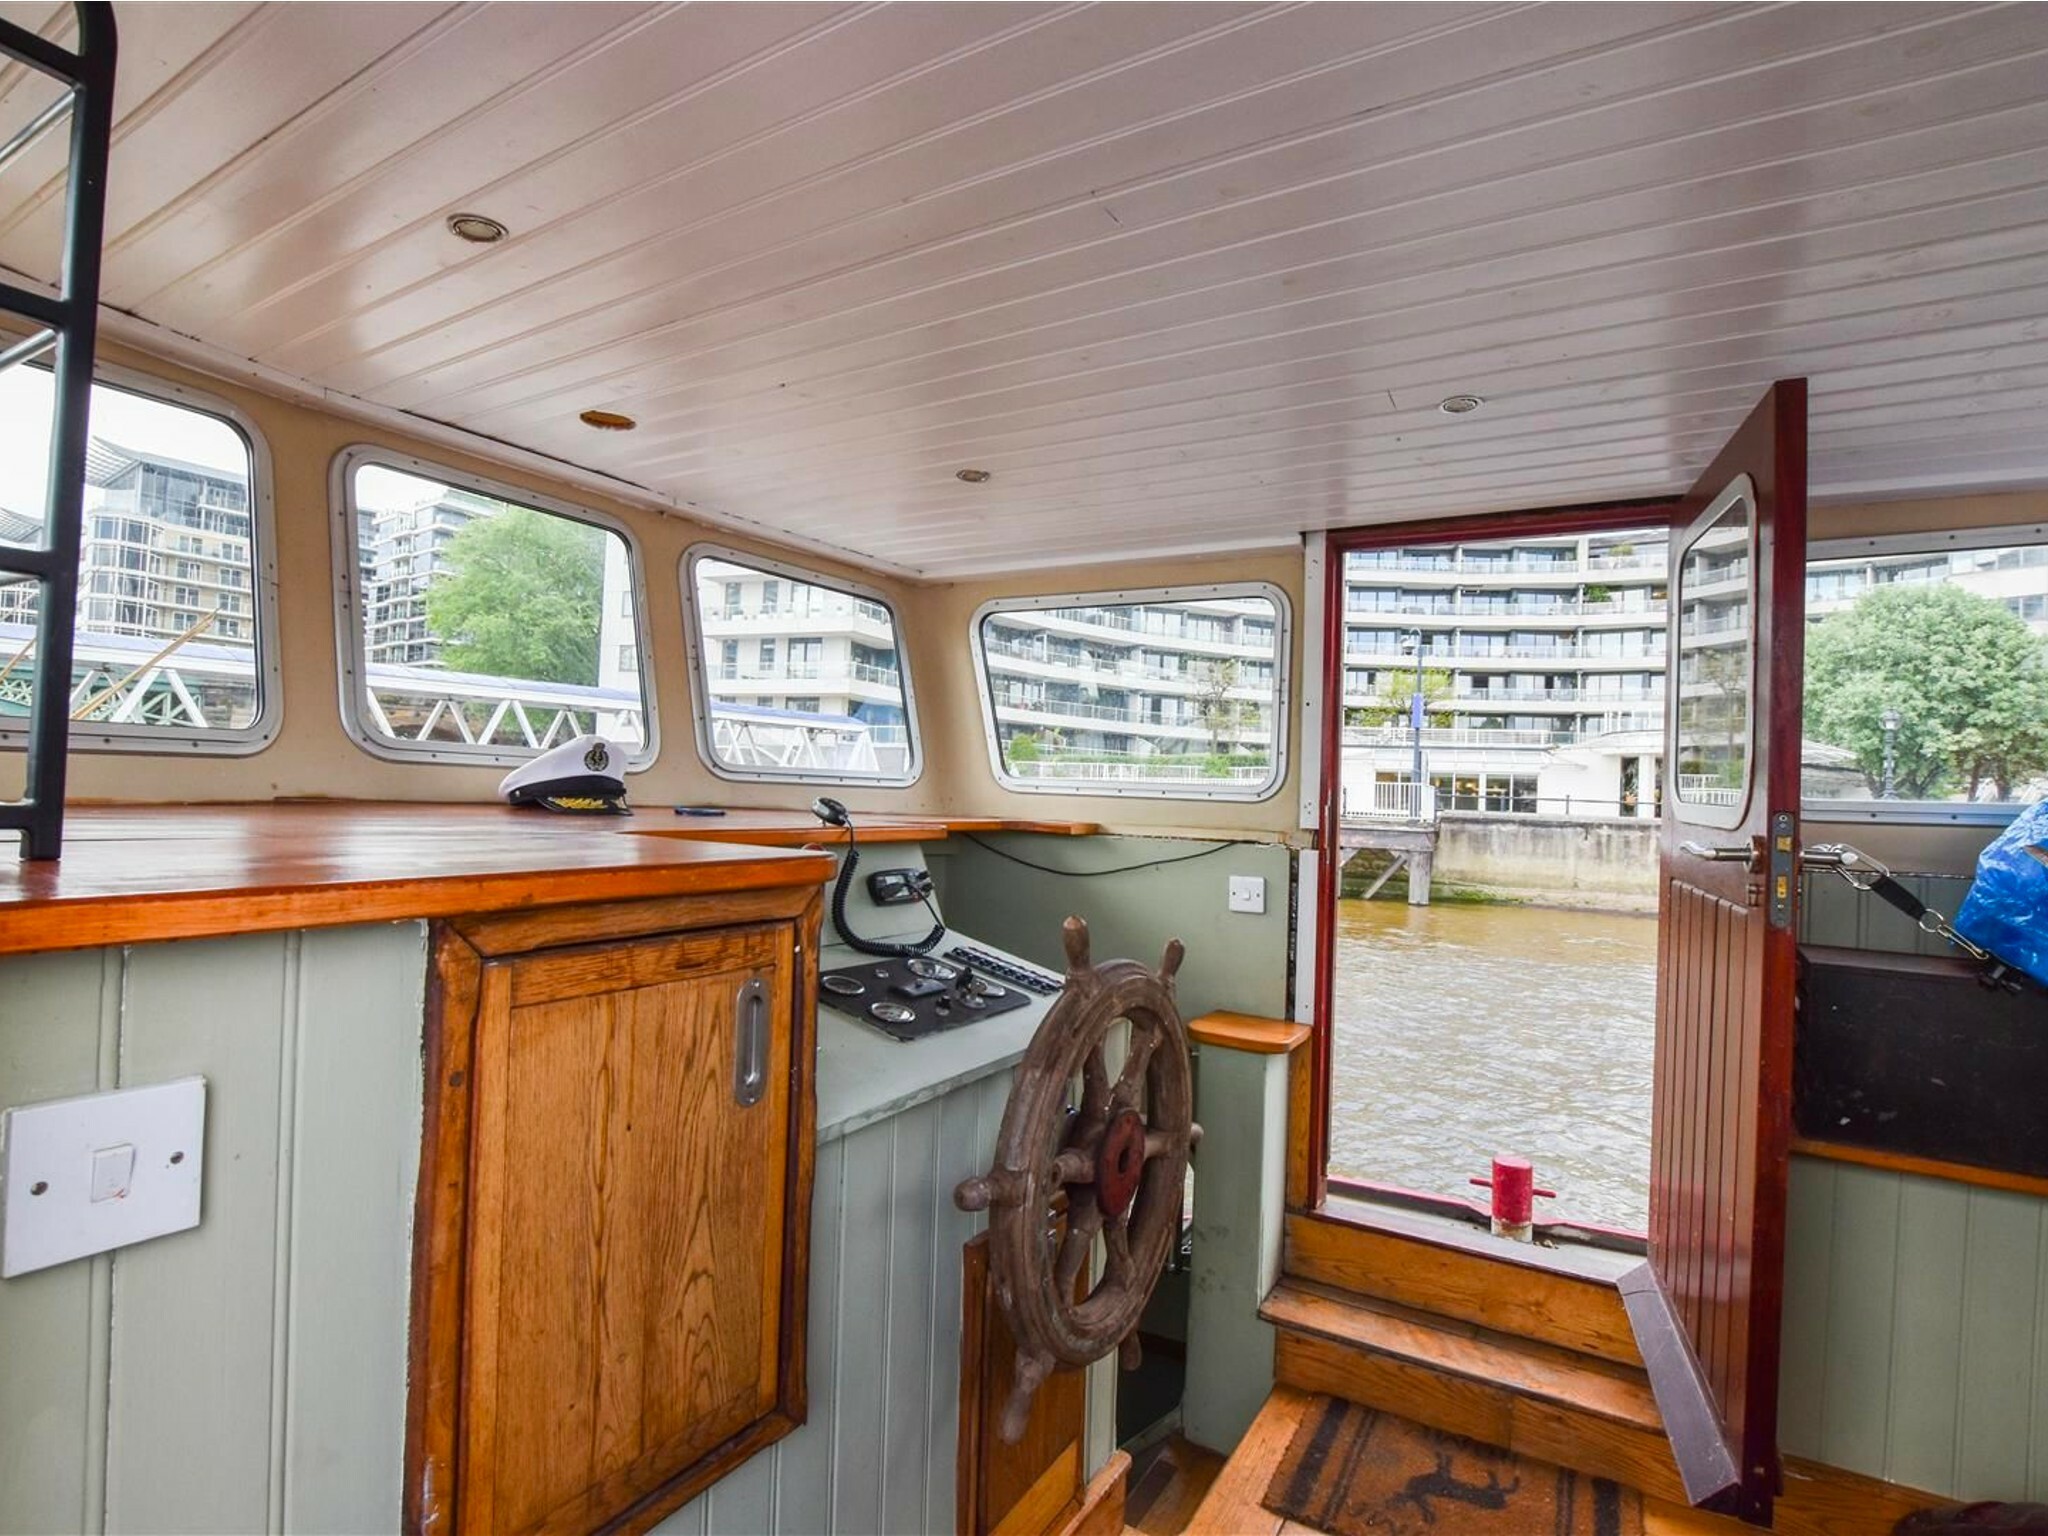 Dutch-style barge for sale in Chelsea Harbour